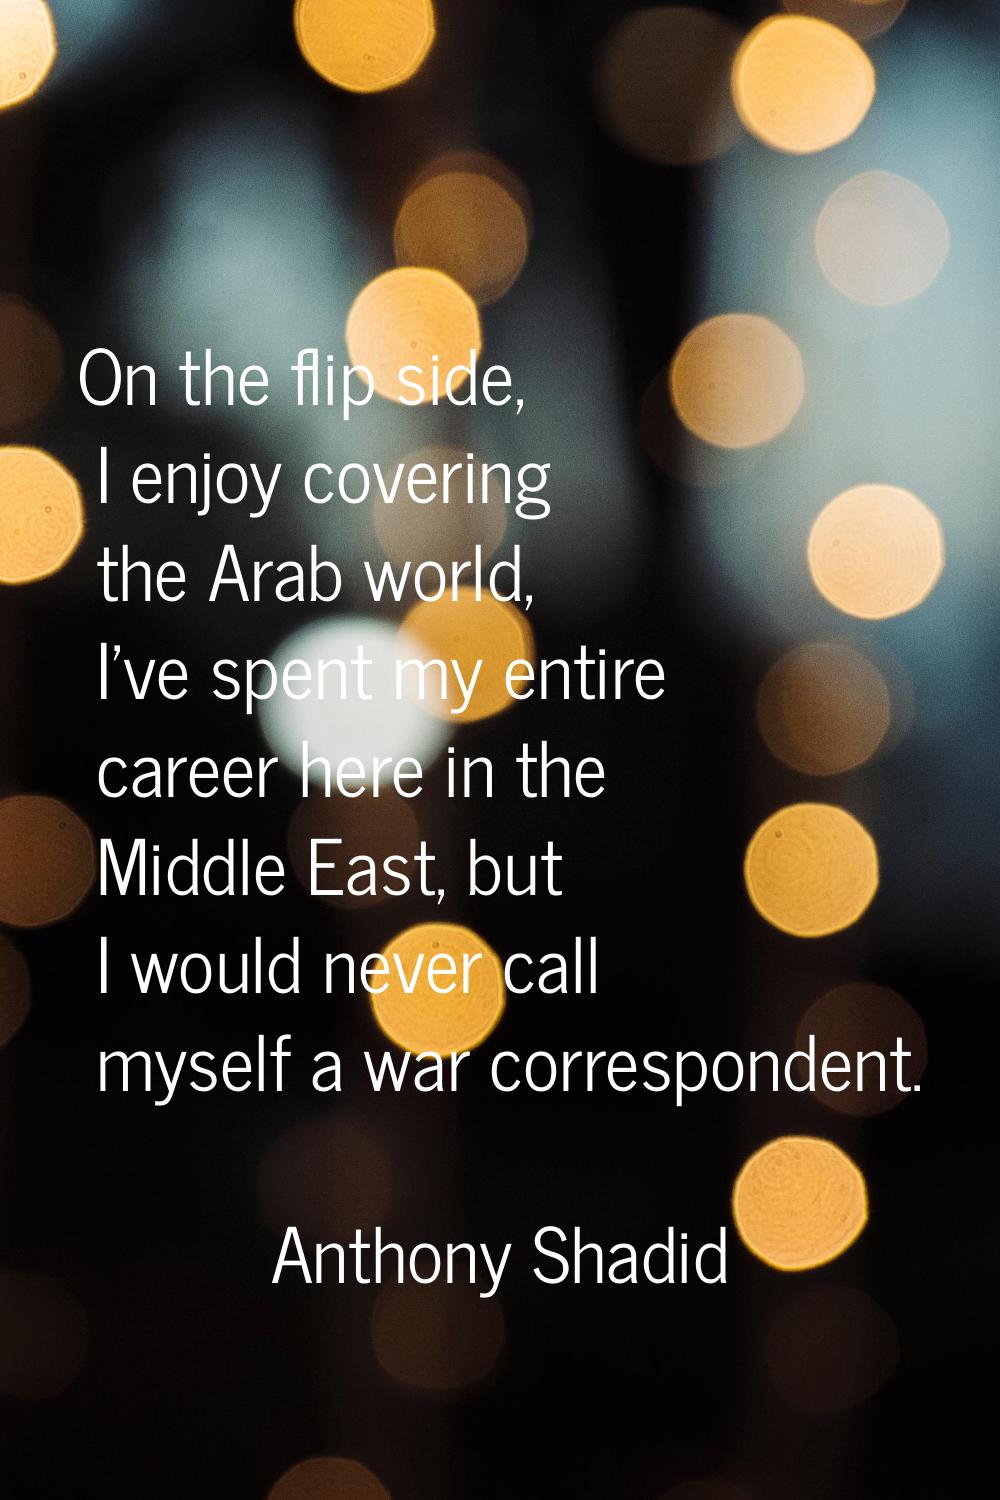 On the flip side, I enjoy covering the Arab world, I've spent my entire career here in the Middle E